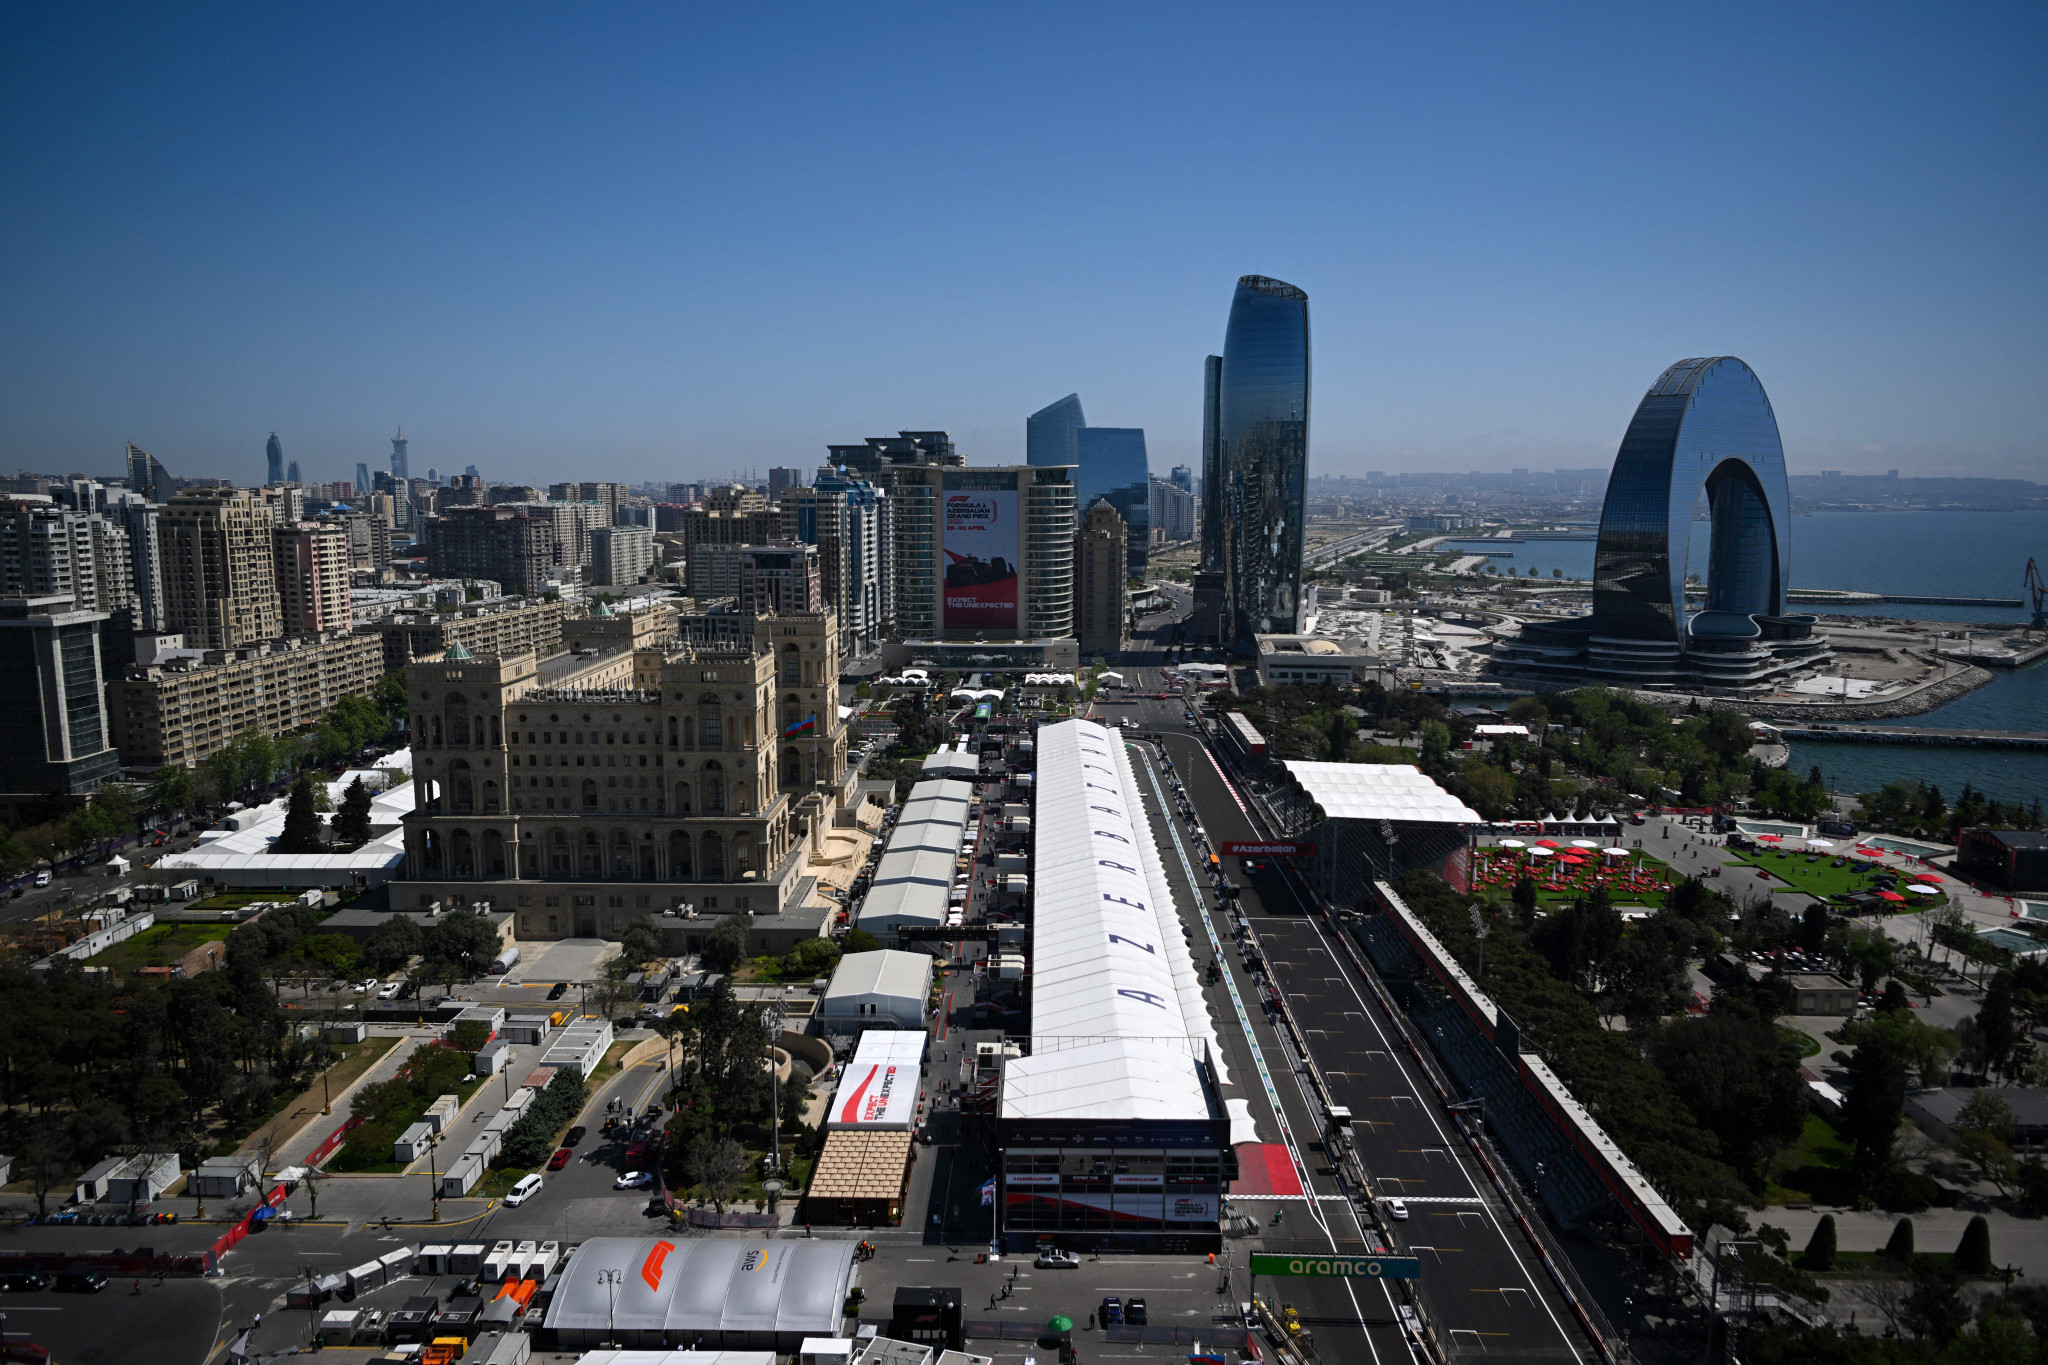 The first sprint race of the 2023 season is set to take place at the Baku City Circuit, with changes made to the previous years' format ©Getty Images